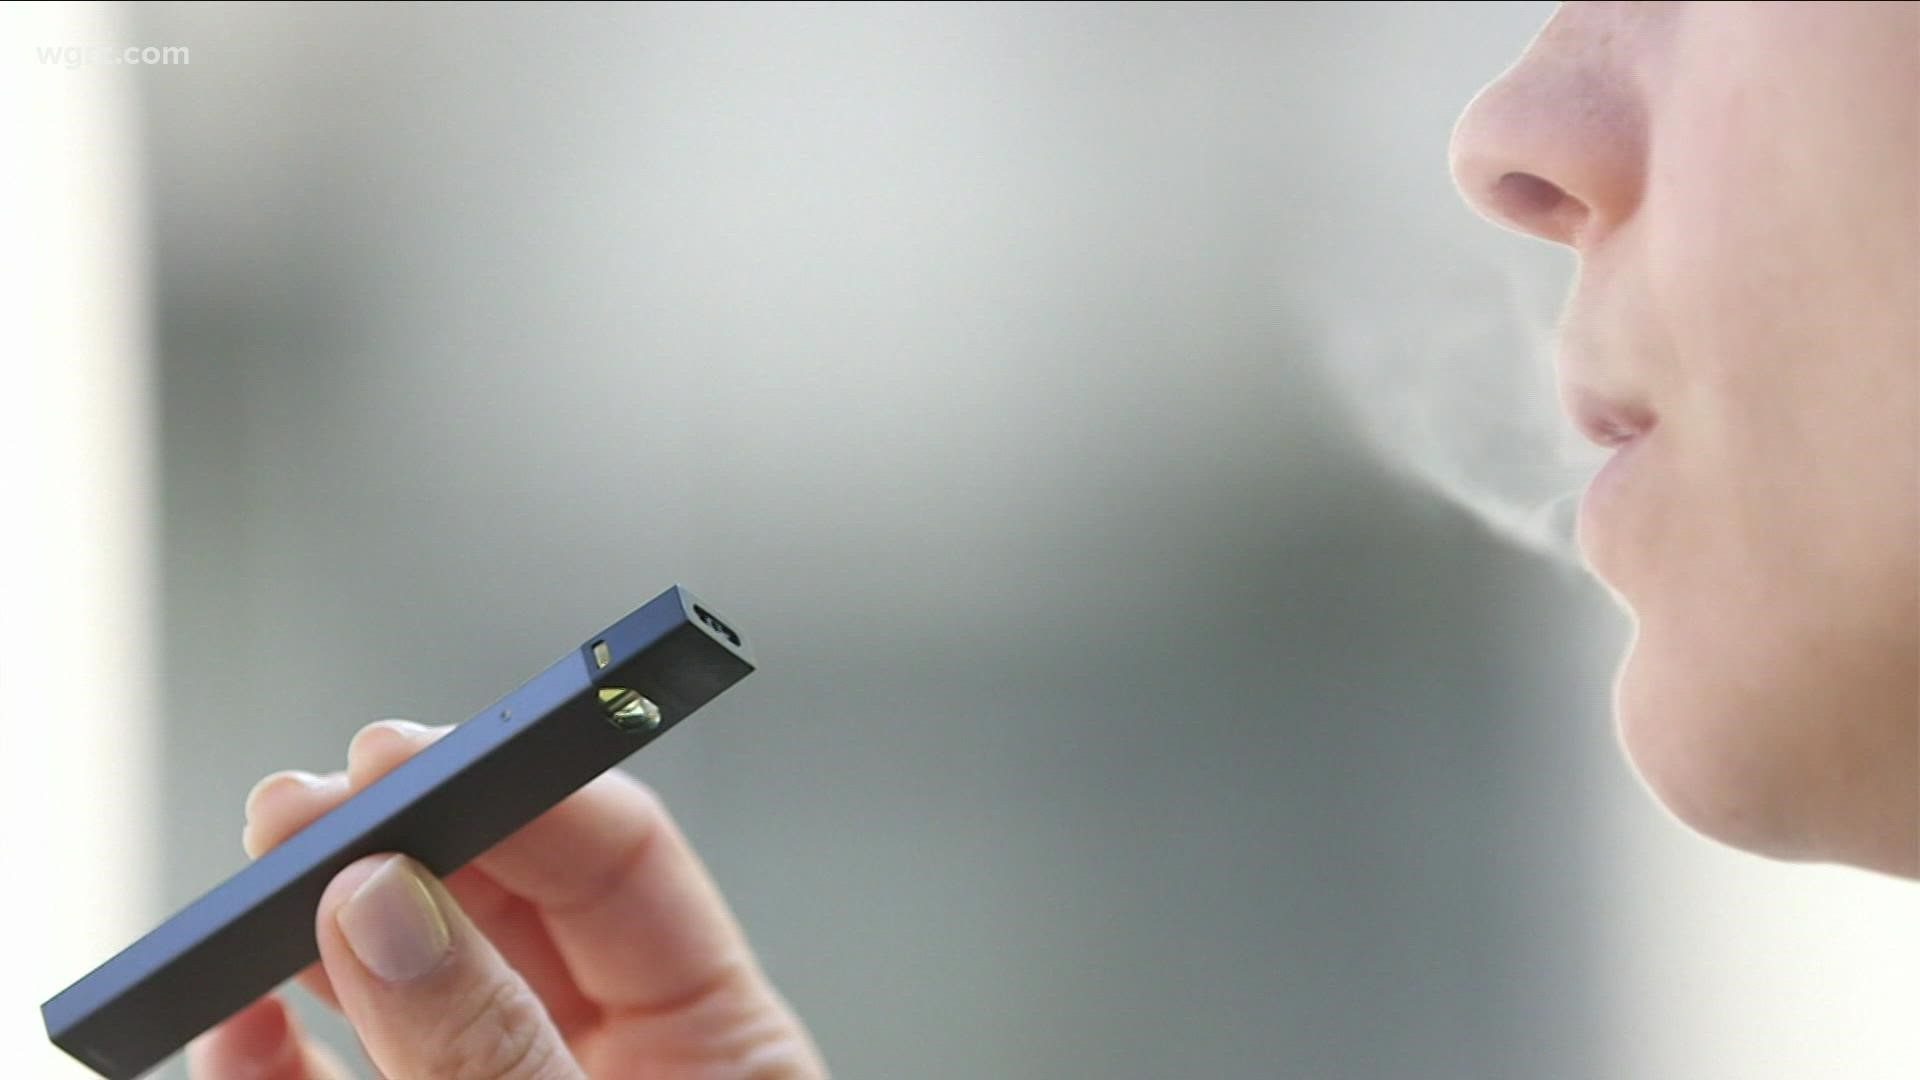 Juul e-cigarettes can still be sold in the US despite an FDA ruling last week banning their sale. Juul is appealing the FDA's decision.